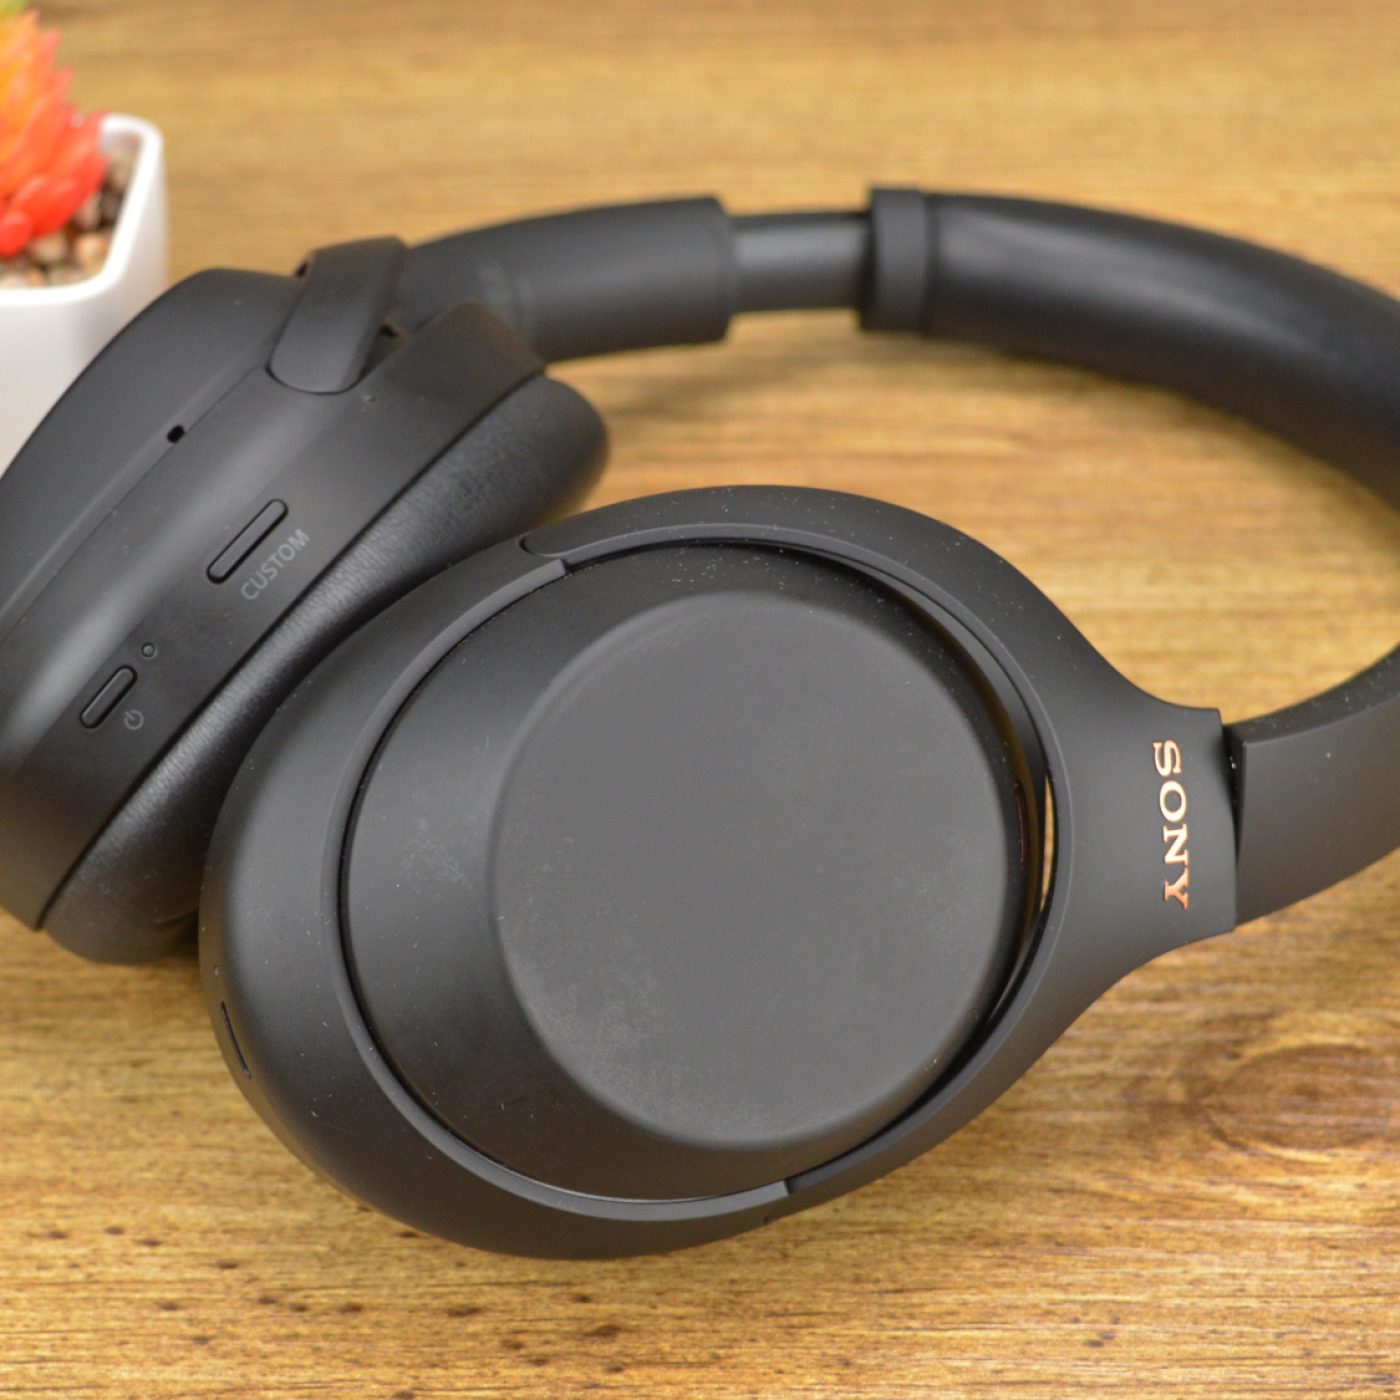 Sony WH-1000XM4 Review - How Does It Sound? –